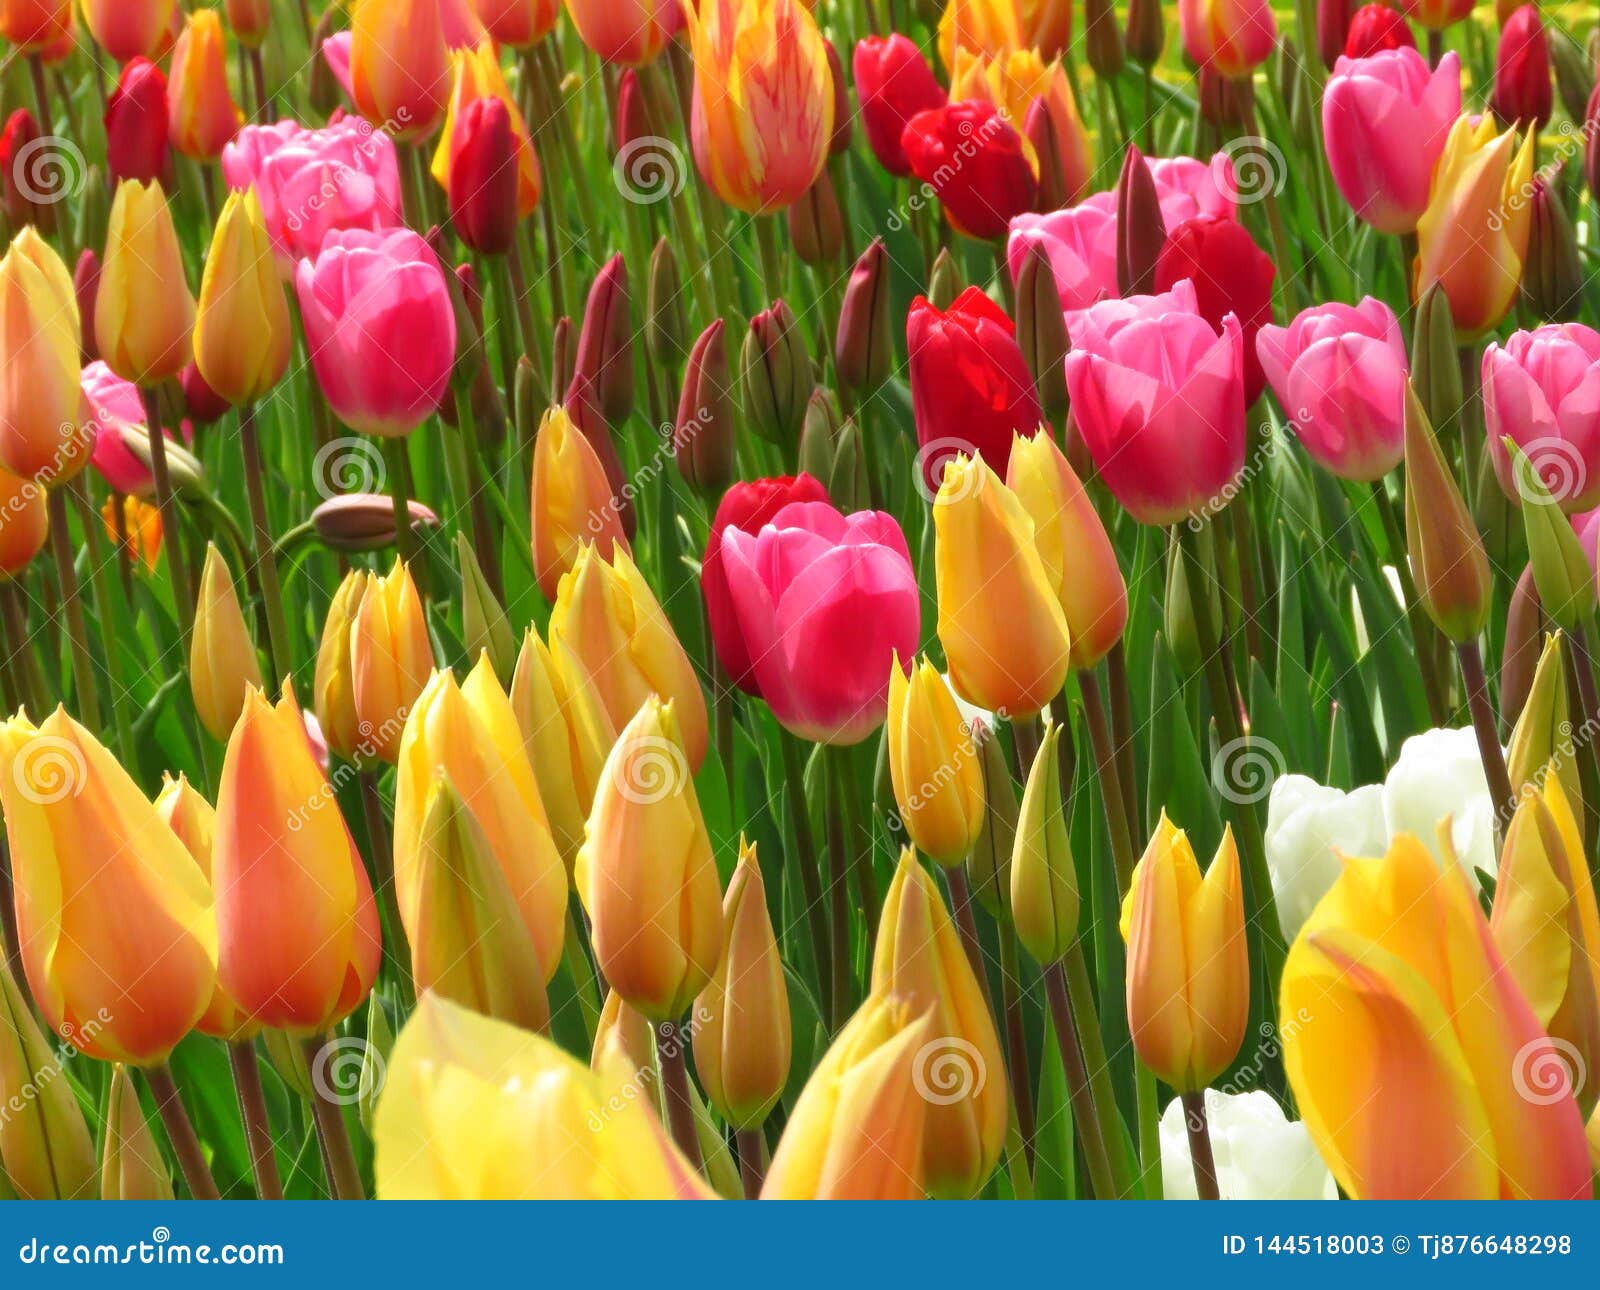 Amazing Yellow Red Diverse Tulips and Tulip Buds Blooming in a Park ...